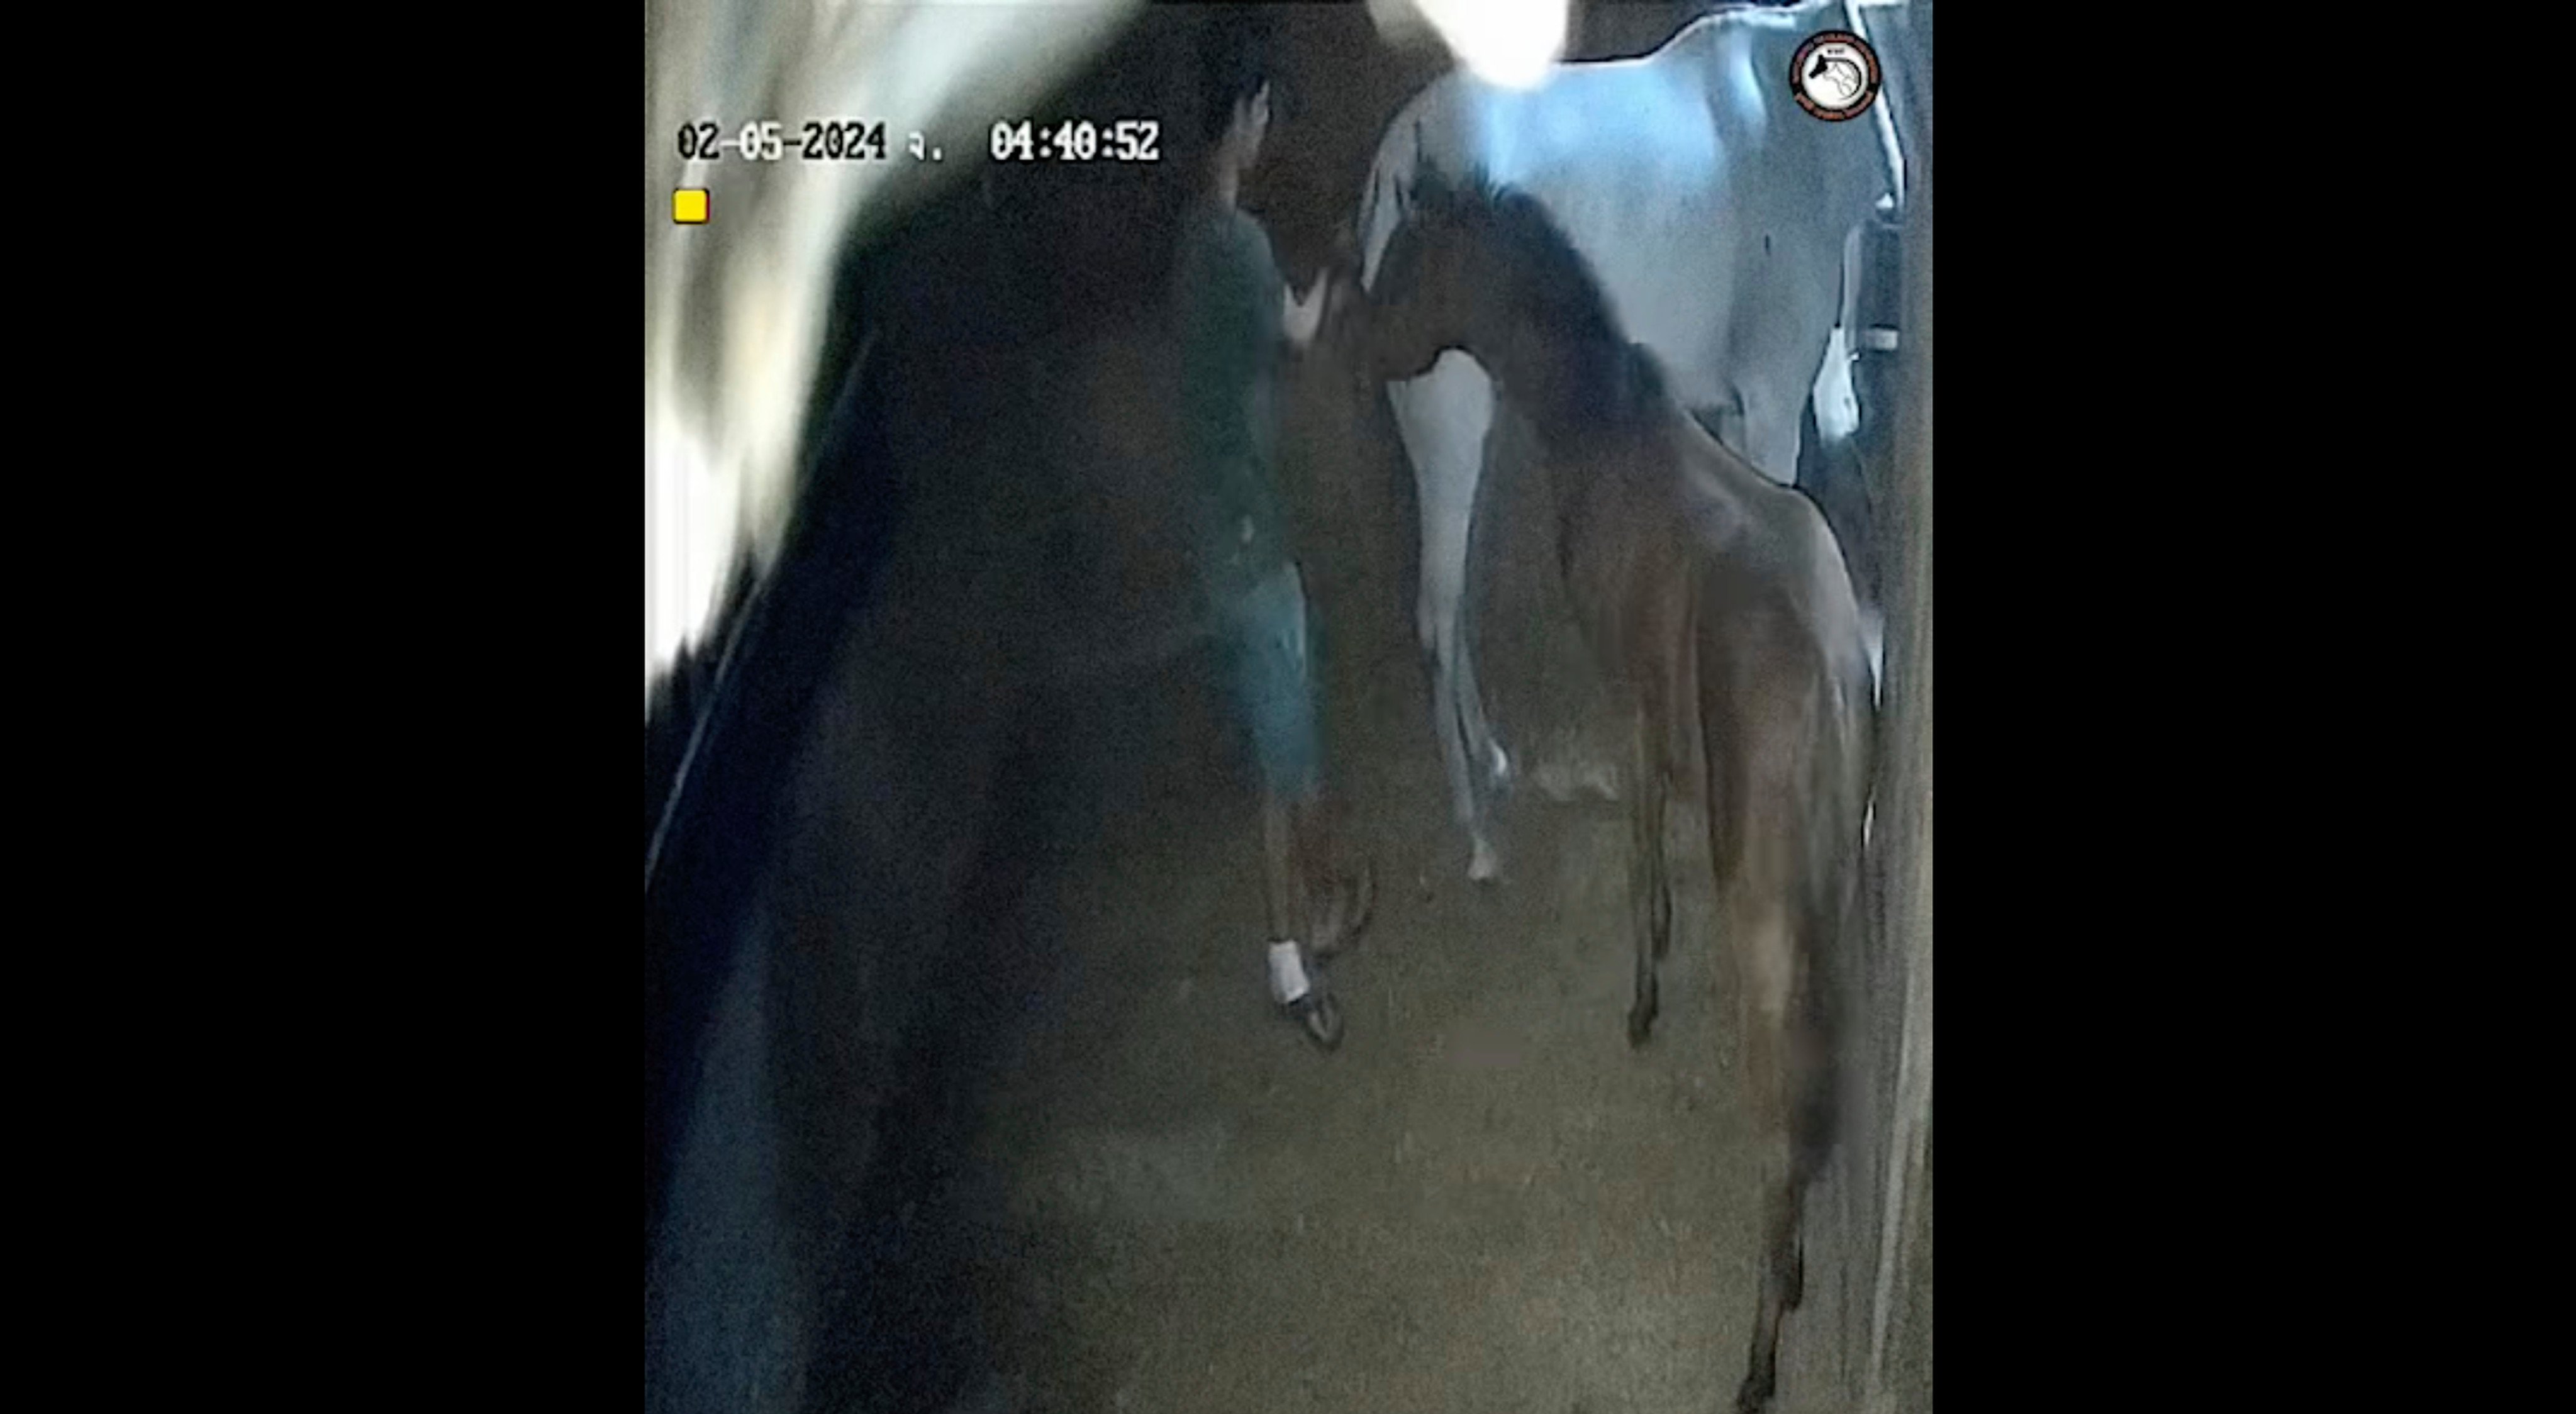 An American teenager was captured on CCTV allegedly indulging in bestiality in a stable in Thalang district in Thailand. Photo: Facebook/Watchdog Thailand Foundation